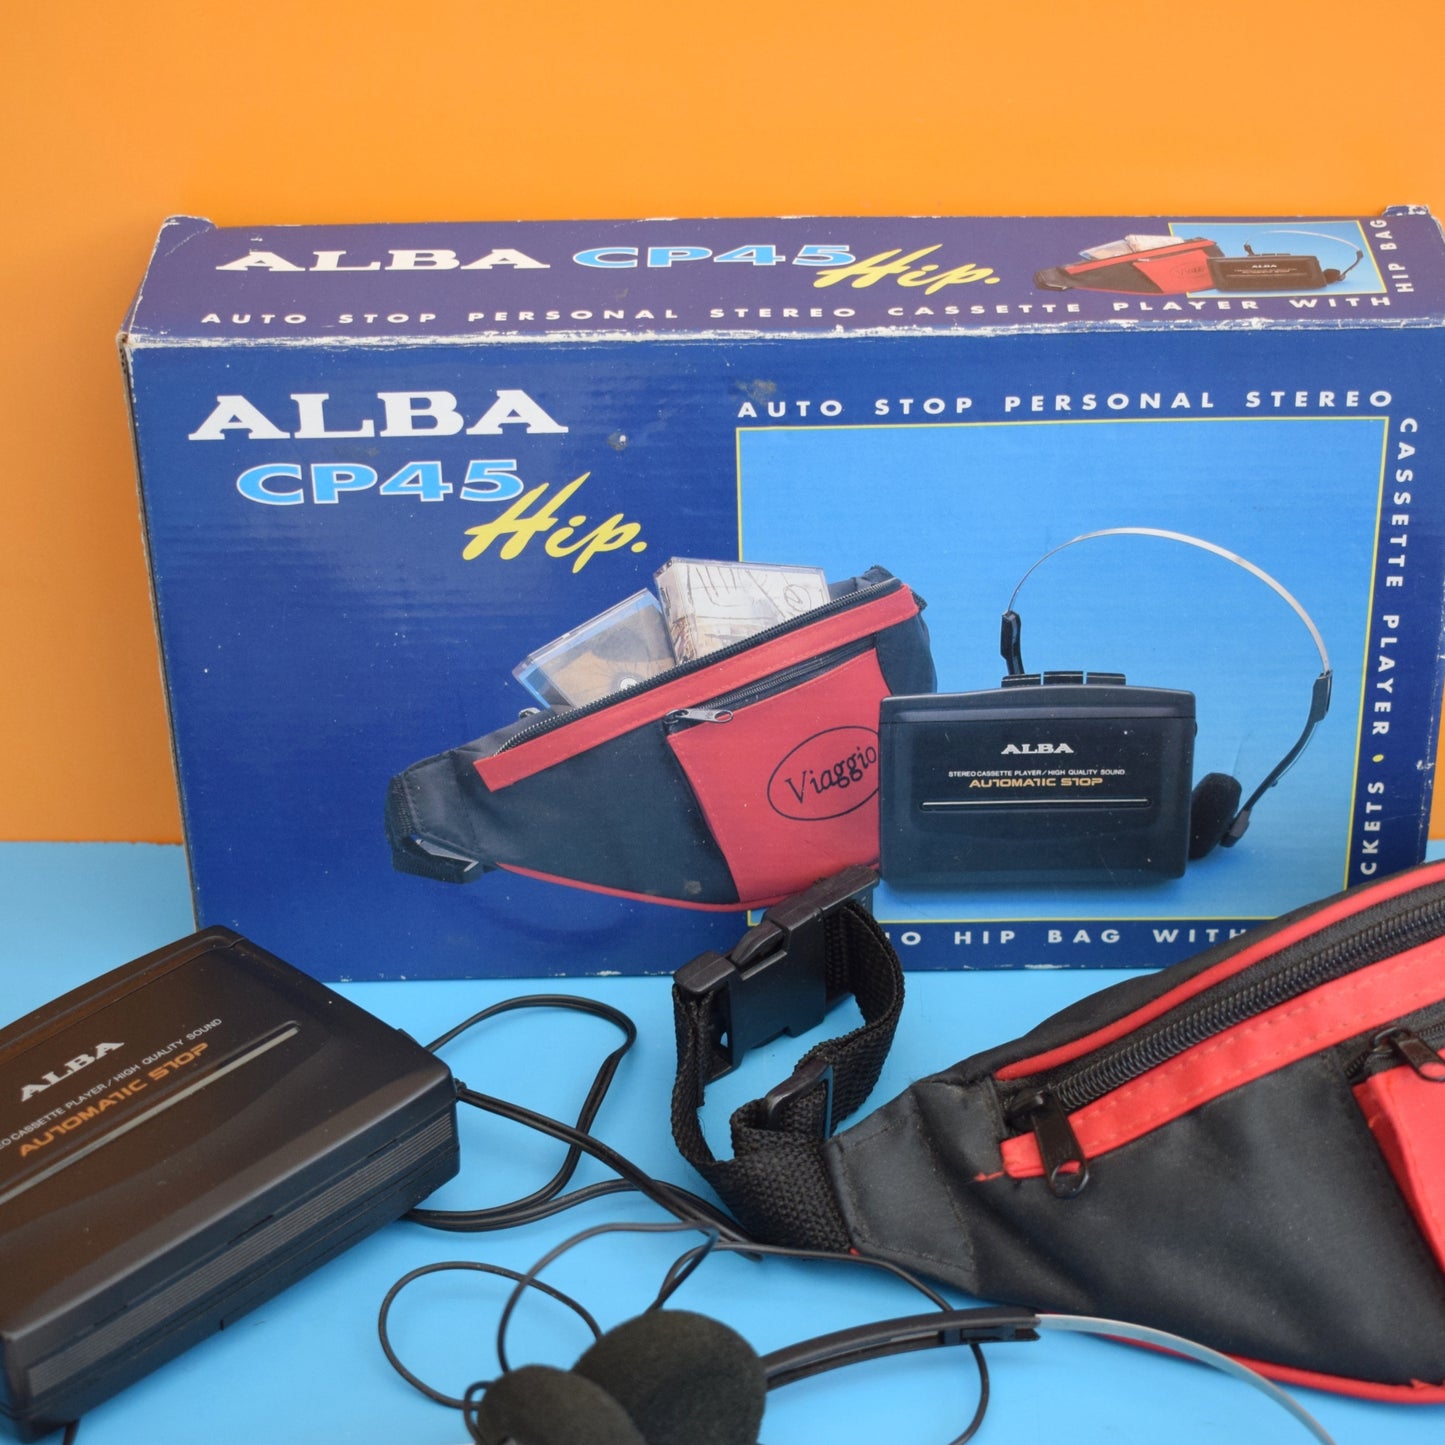 Vintage 1990s Personal Stereo Cassette Player Set - Boxed - Alba CP45